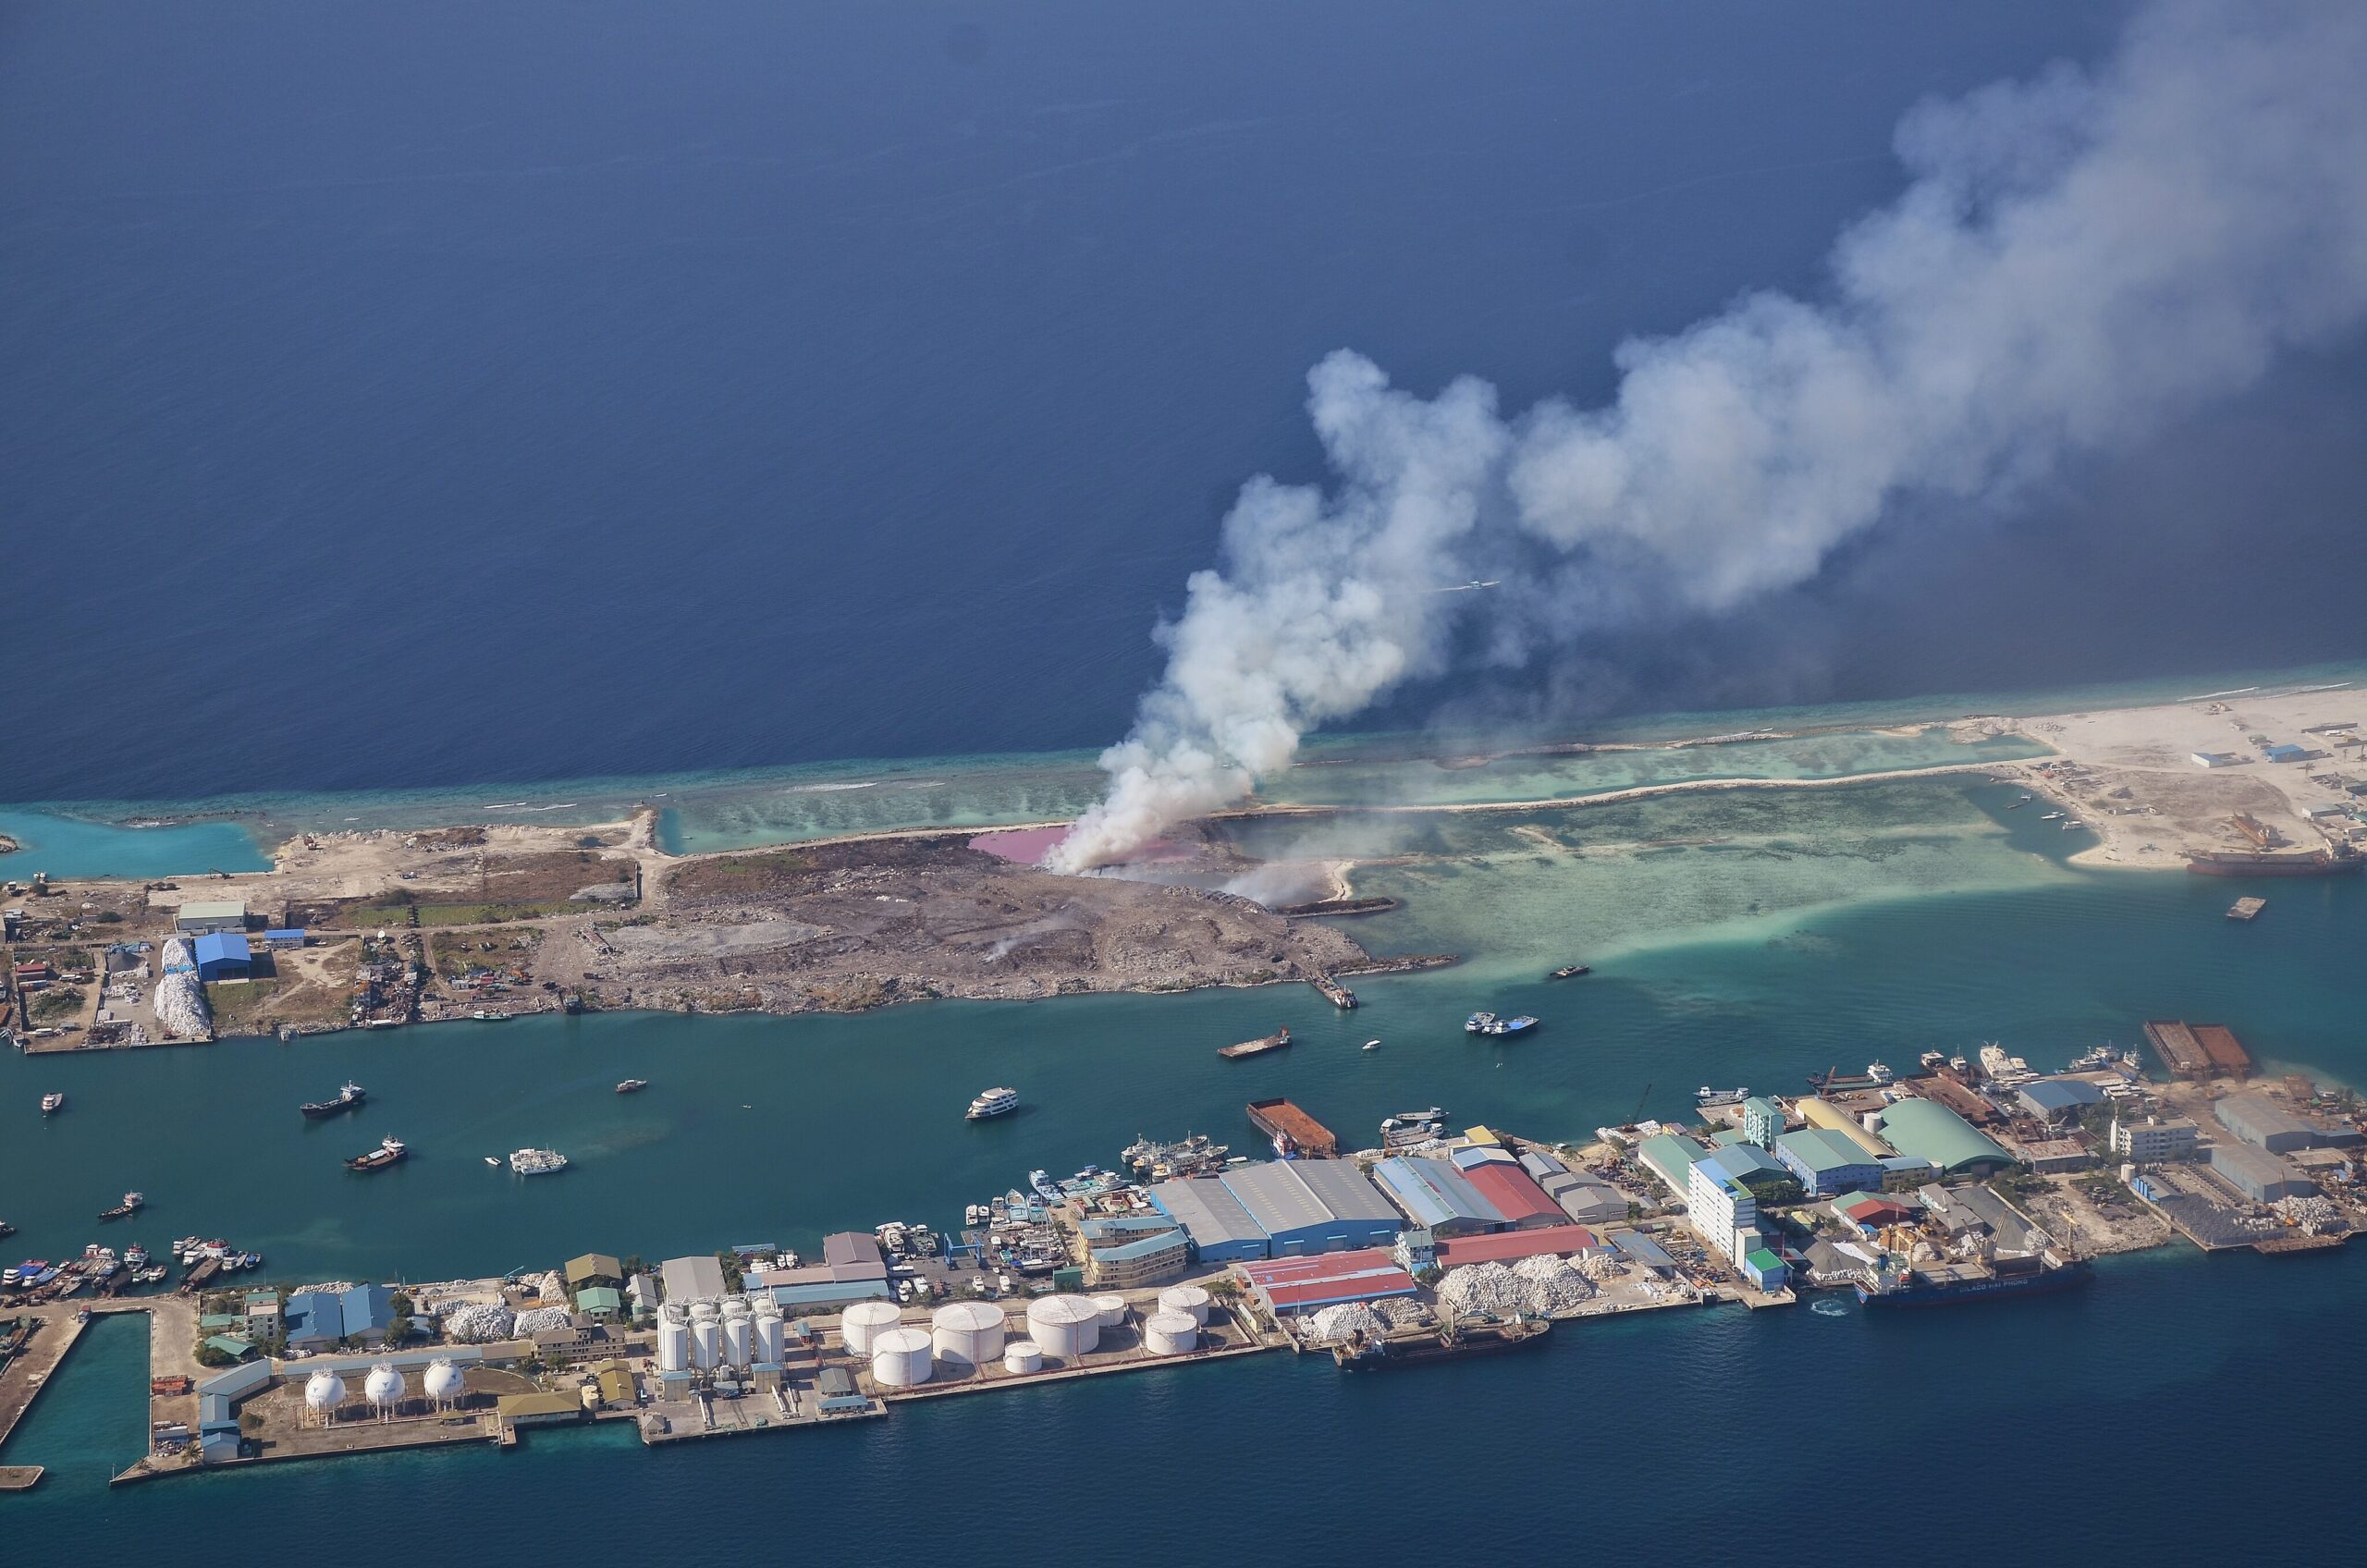 Aerial view of Thilafushi island with a trash burning plume visible